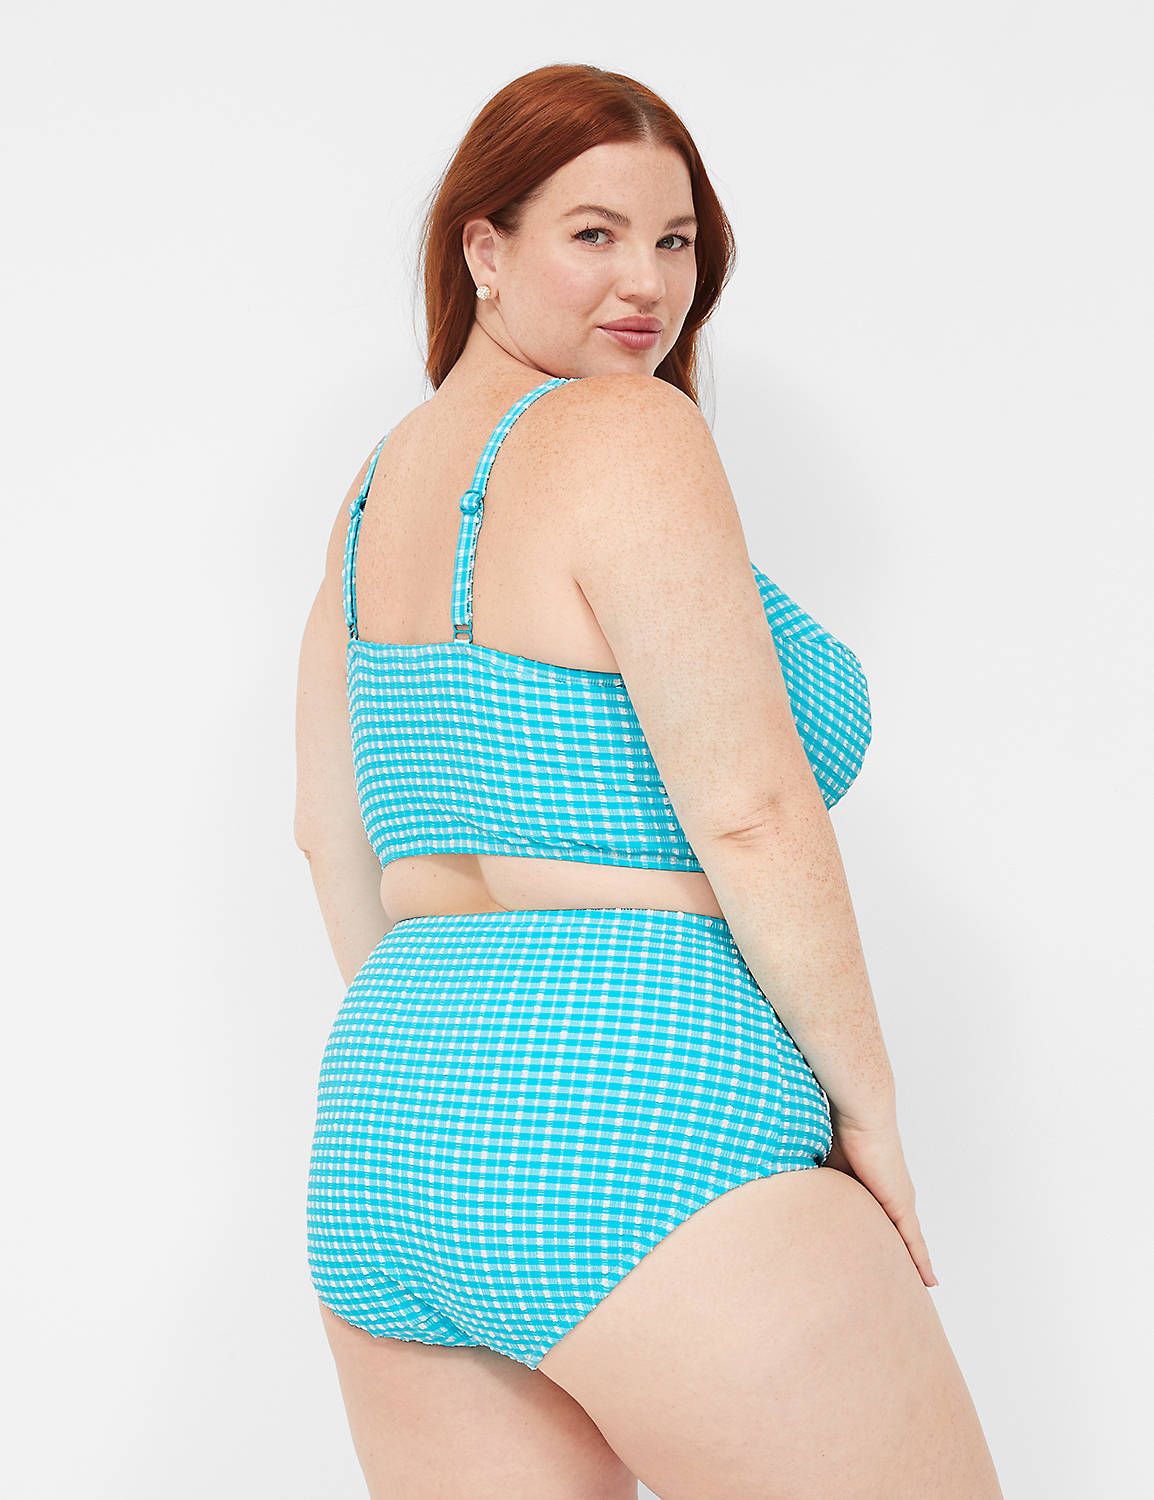 Gingham Brief 1138788 Product Image 4